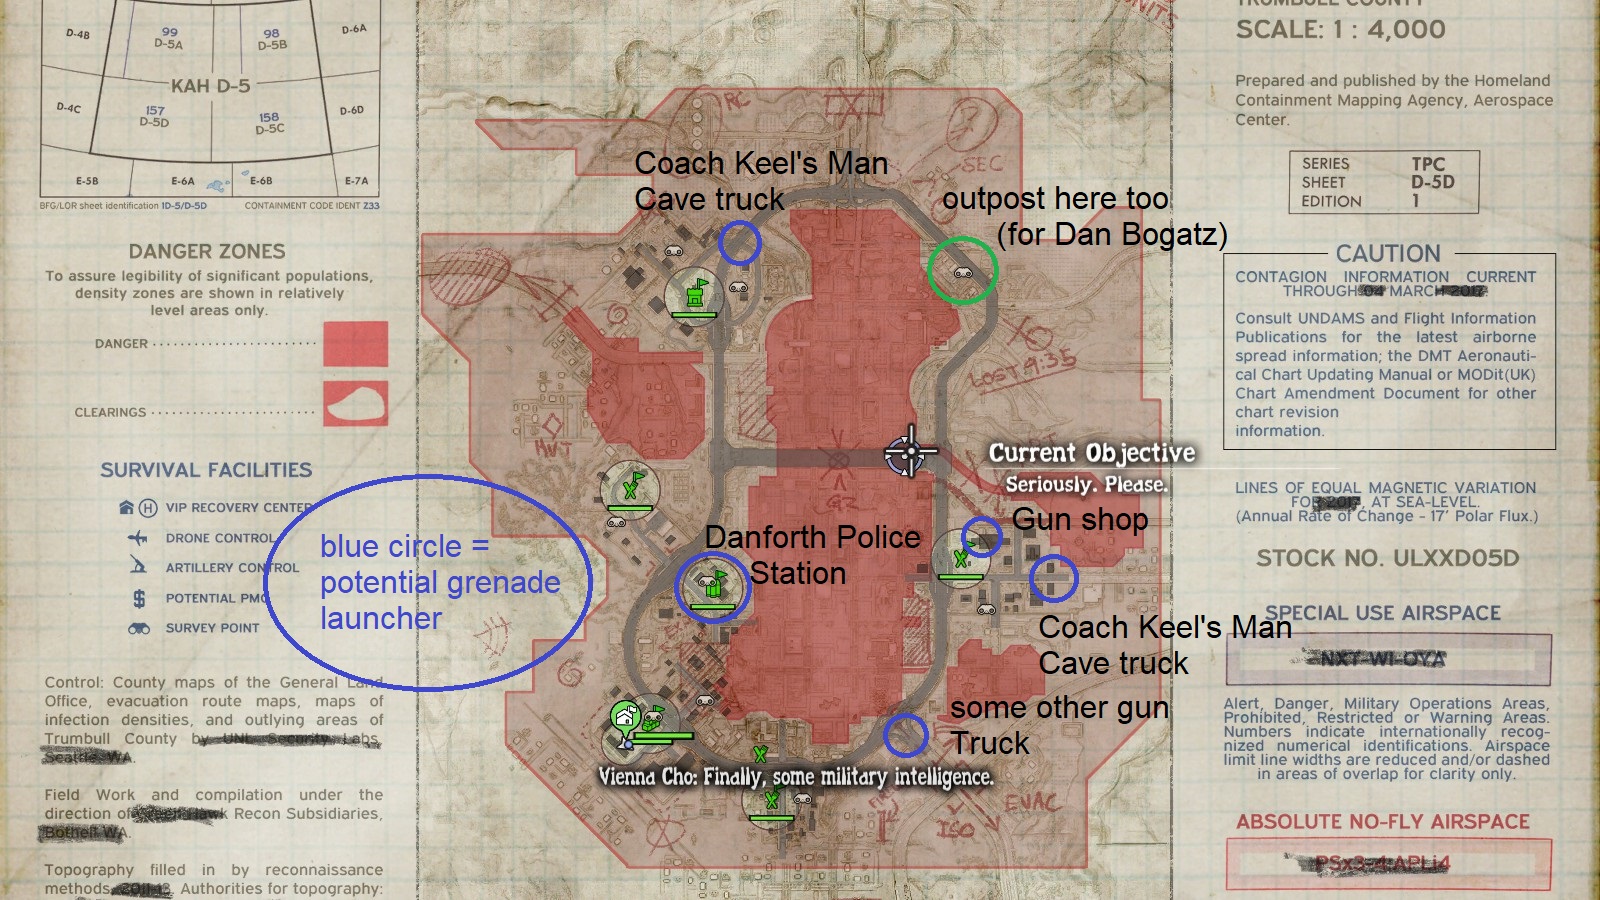 Guide To Better Surviving, State of Decay Wiki